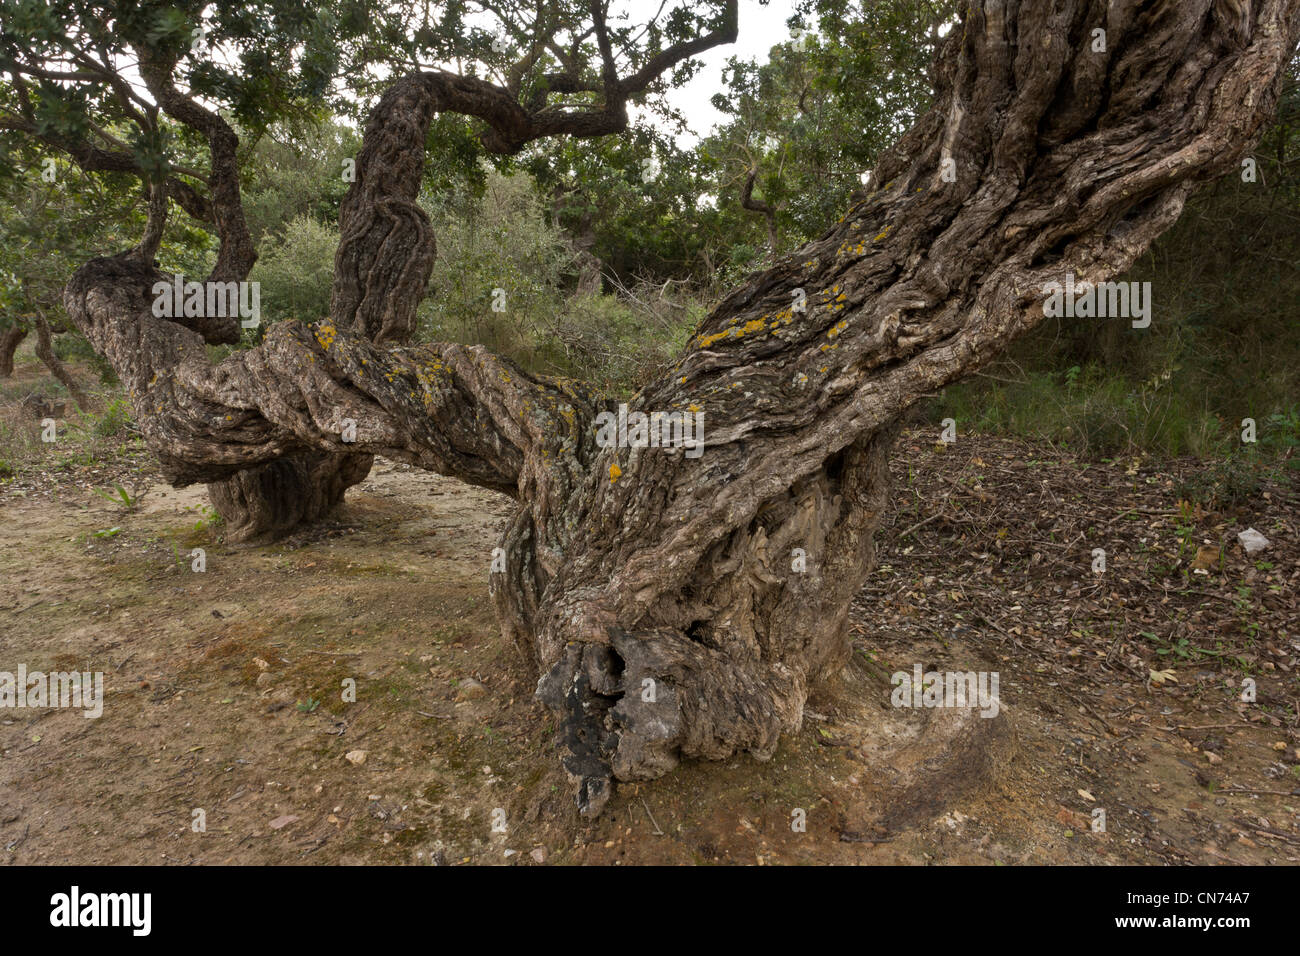 Ancient Mastic trees, Pistacia lentiscus var chia in cultivation on the greek island of Chios, Greece. Stock Photo